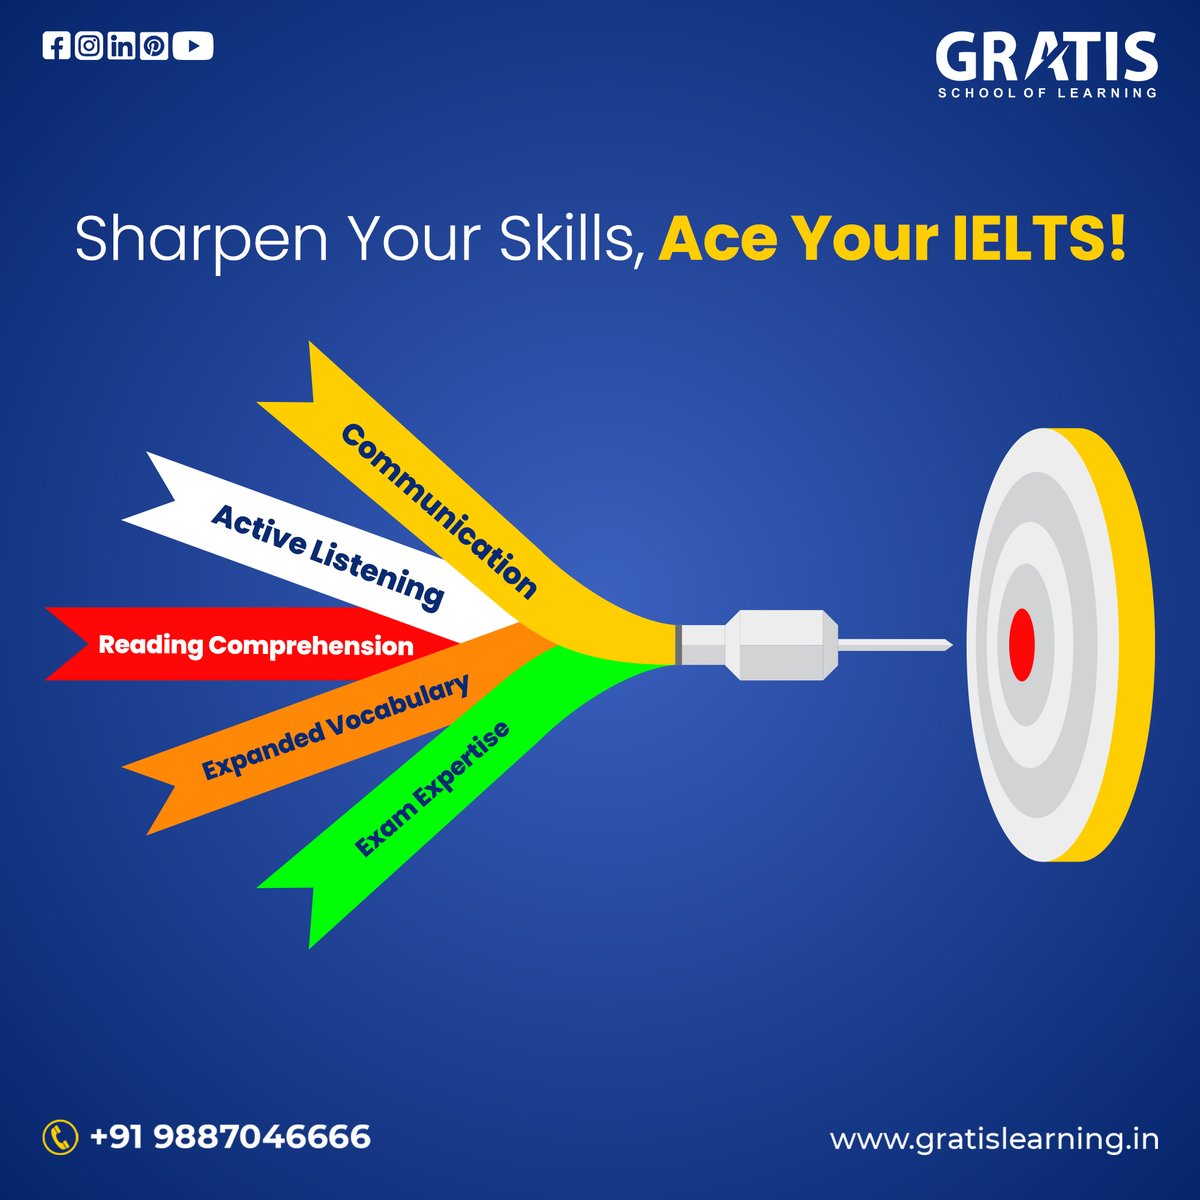 The #IELTSexam demands proficiency across various #Englishlanguage areas. 
Here are 5 crucial skills to focus on, and how #GratisLearning can empower you.
gratislearning.in
𝗖𝗮𝗹𝗹 𝘂𝘀:+91 9887046666

#GratisSchoolOfLearning #Panchkula #ielts #ieltscoaching #ieltsreading